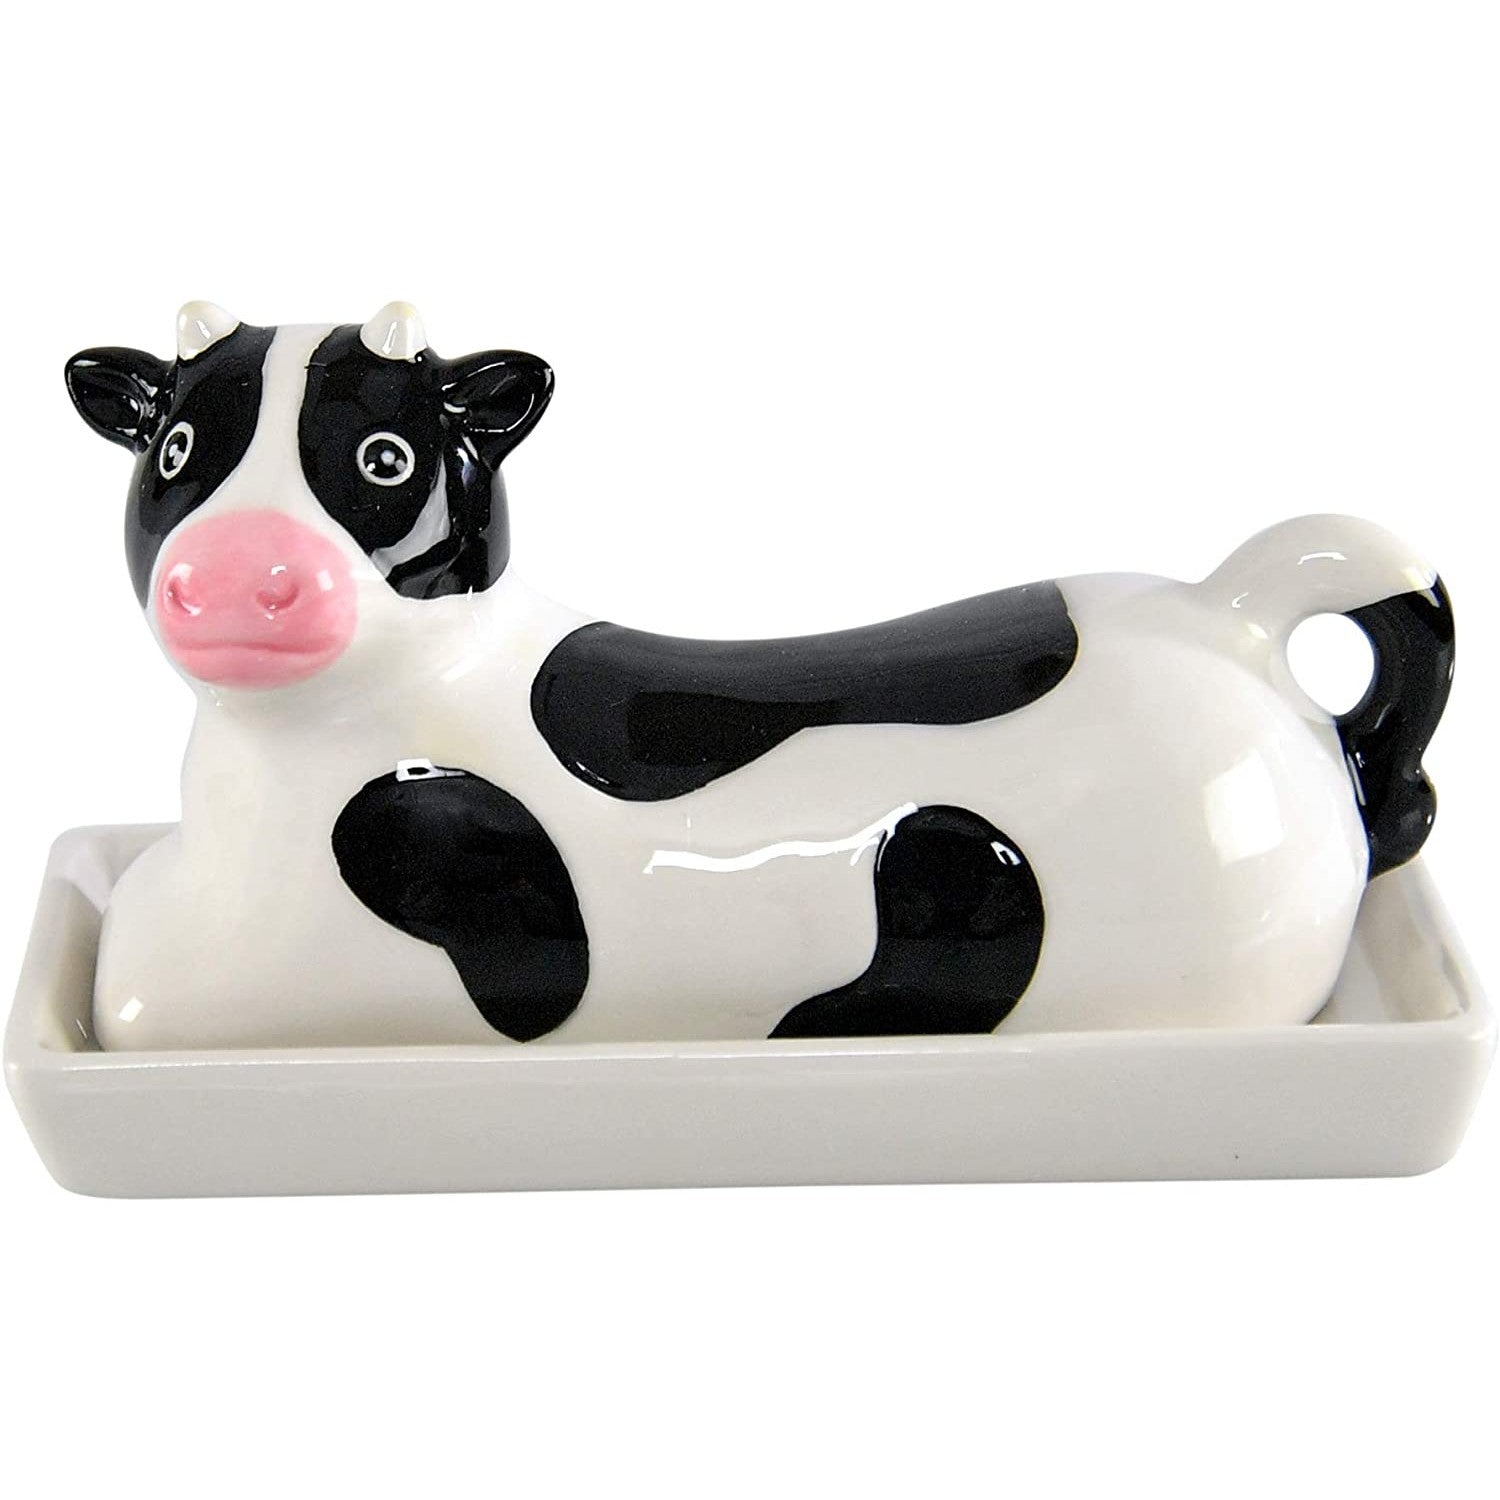 A black and white butter dish shaped like a cow.